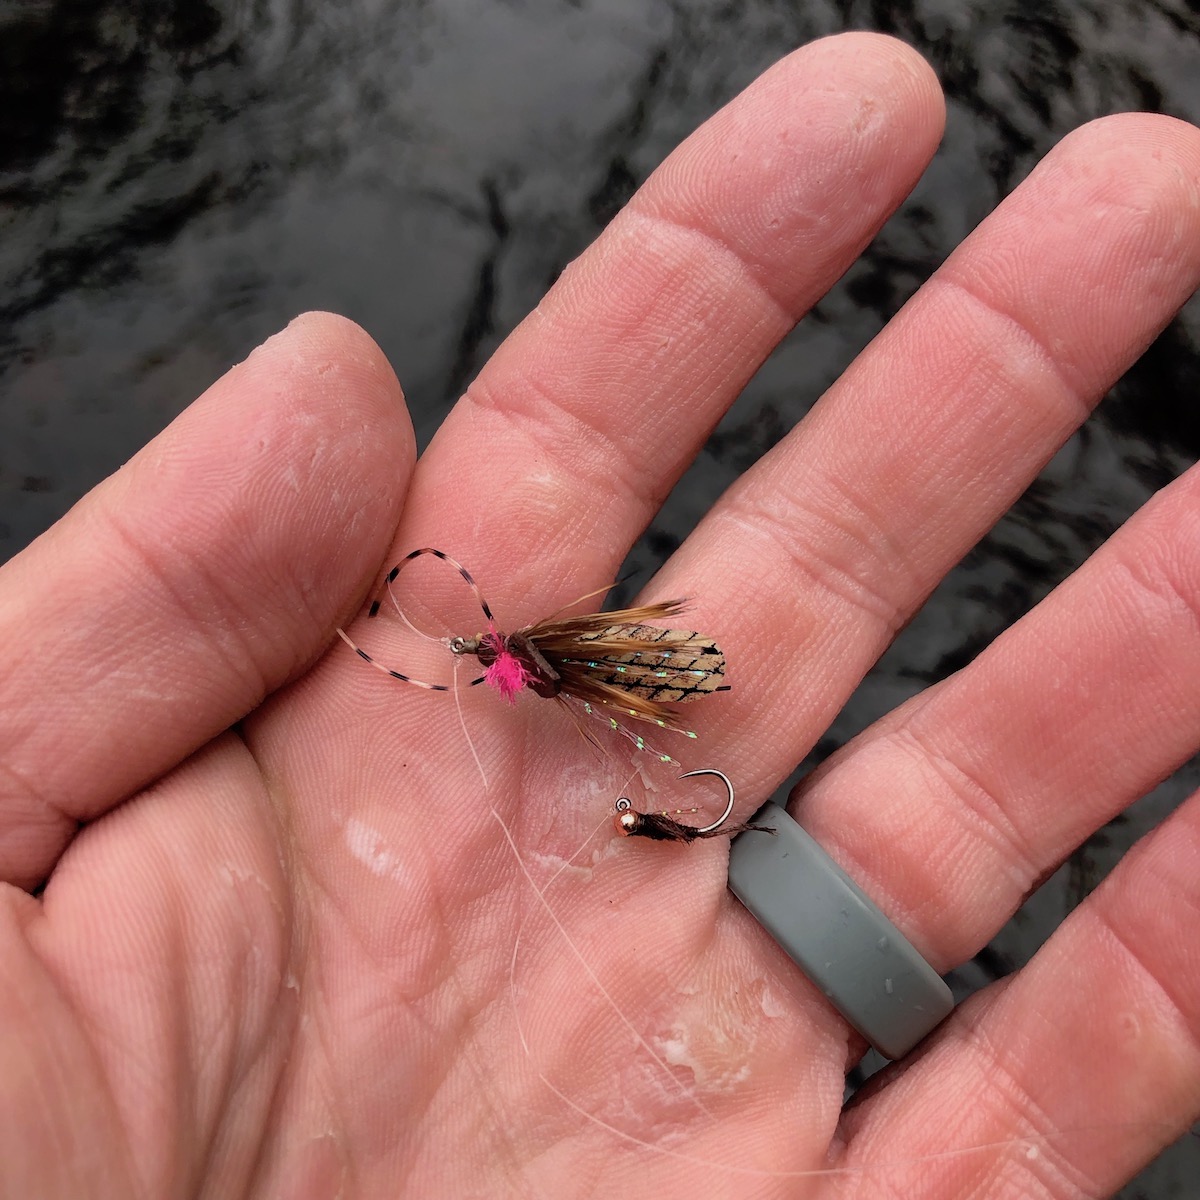 Don't Lead Me On: Tippet Length For Dry Flies - Fly Fishing